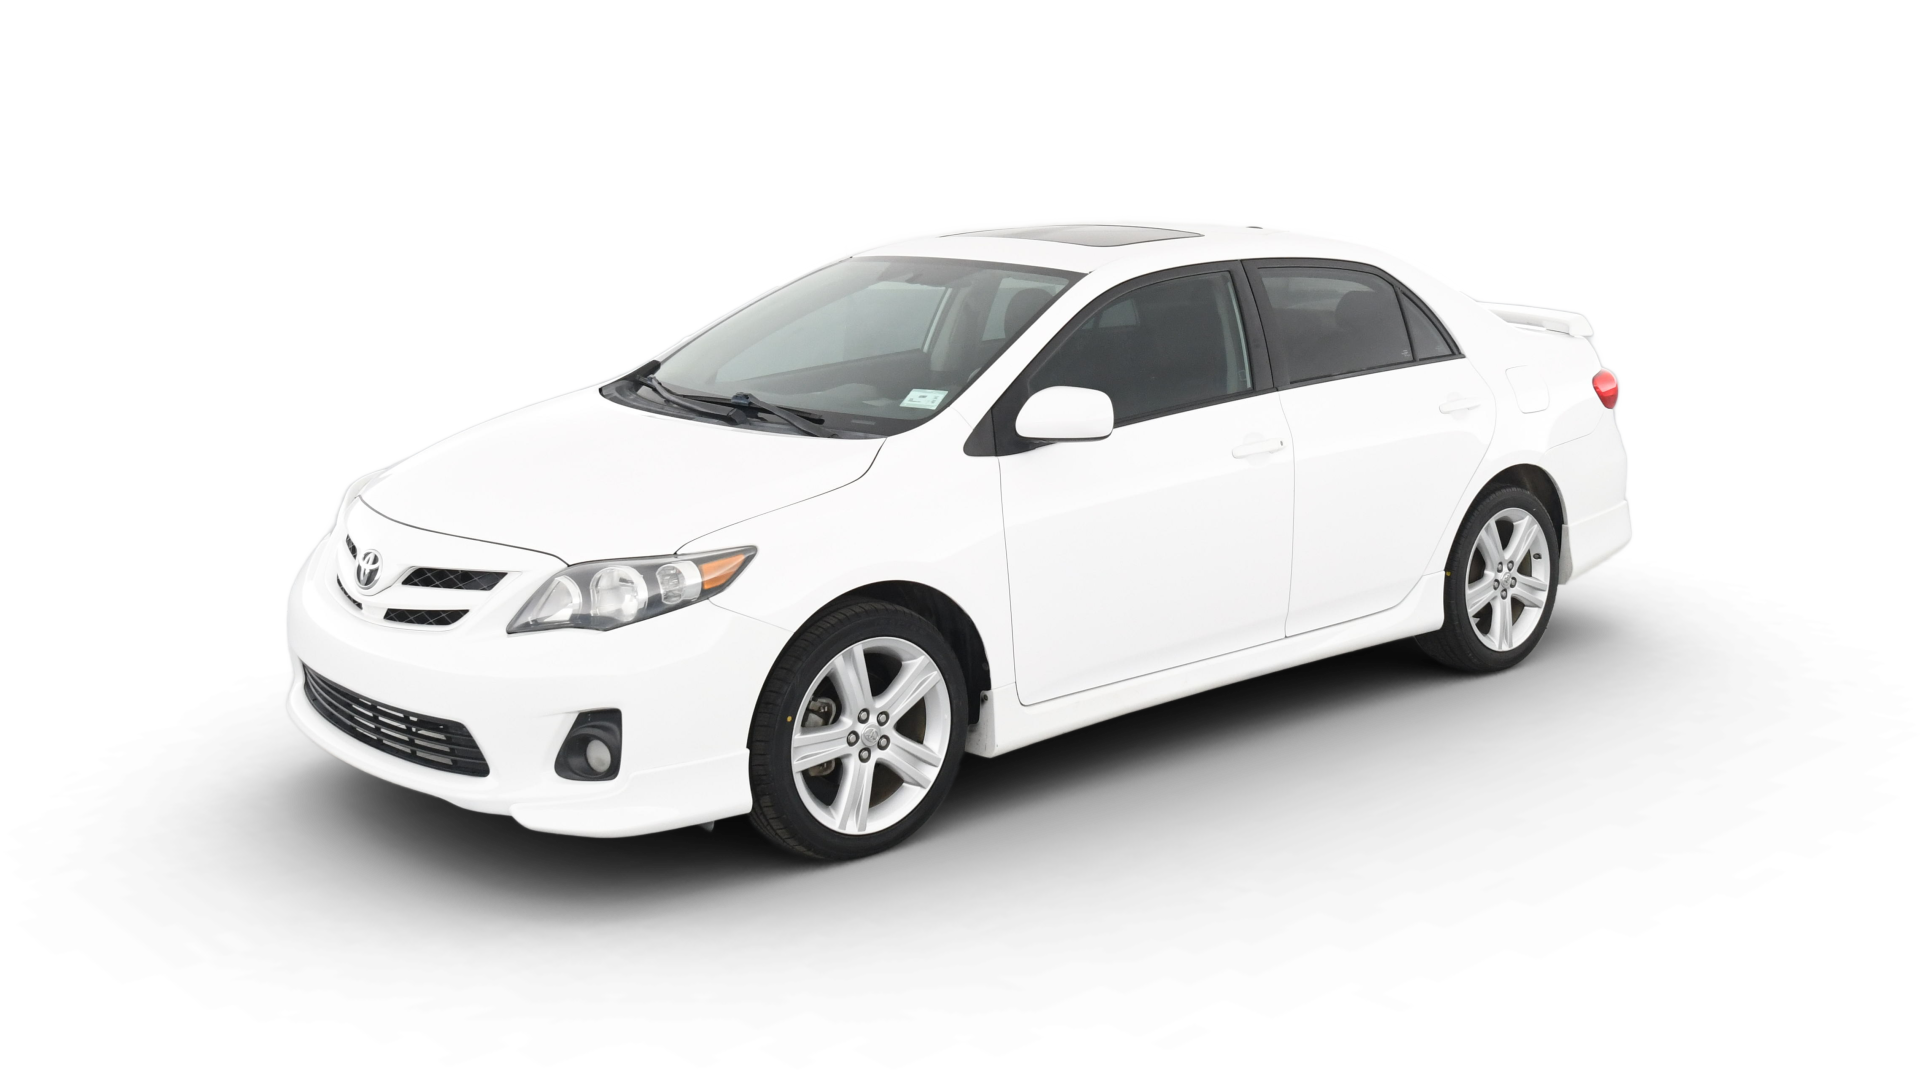 Used Toyota Corolla For Sale Online | Carvana